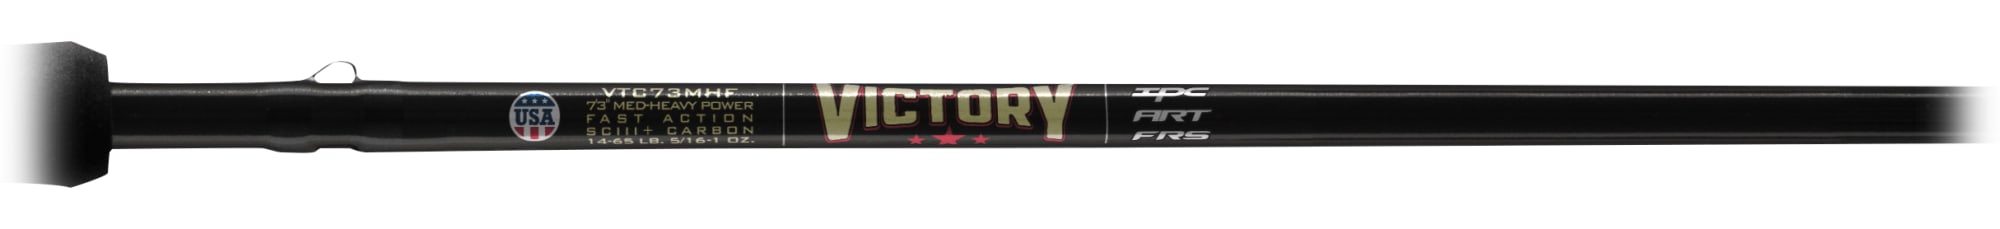 St. Croix Victory Casting Rod - Hamilton Bait and Tackle